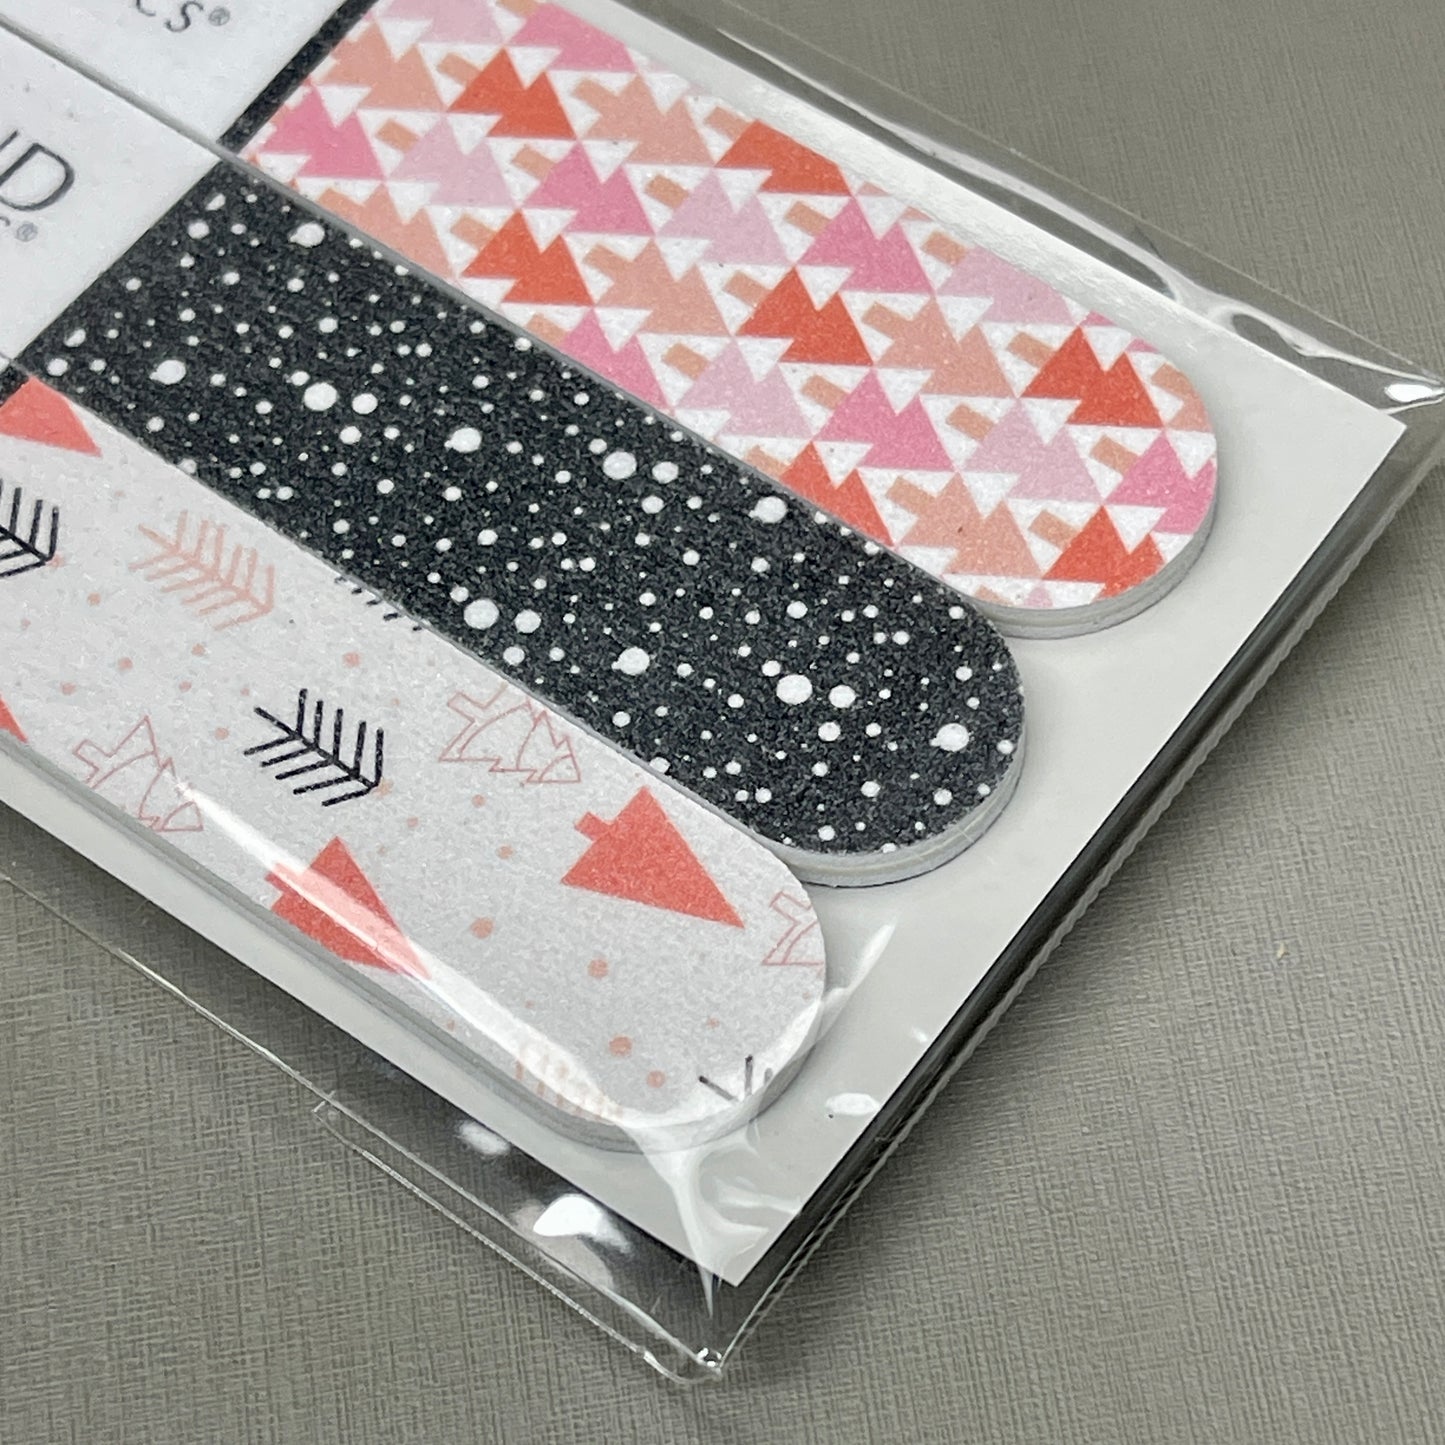 DIAMOND COSMETICS 48 Packs of 3! Holiday Nail Files Multiple Prints 85386DT (New)